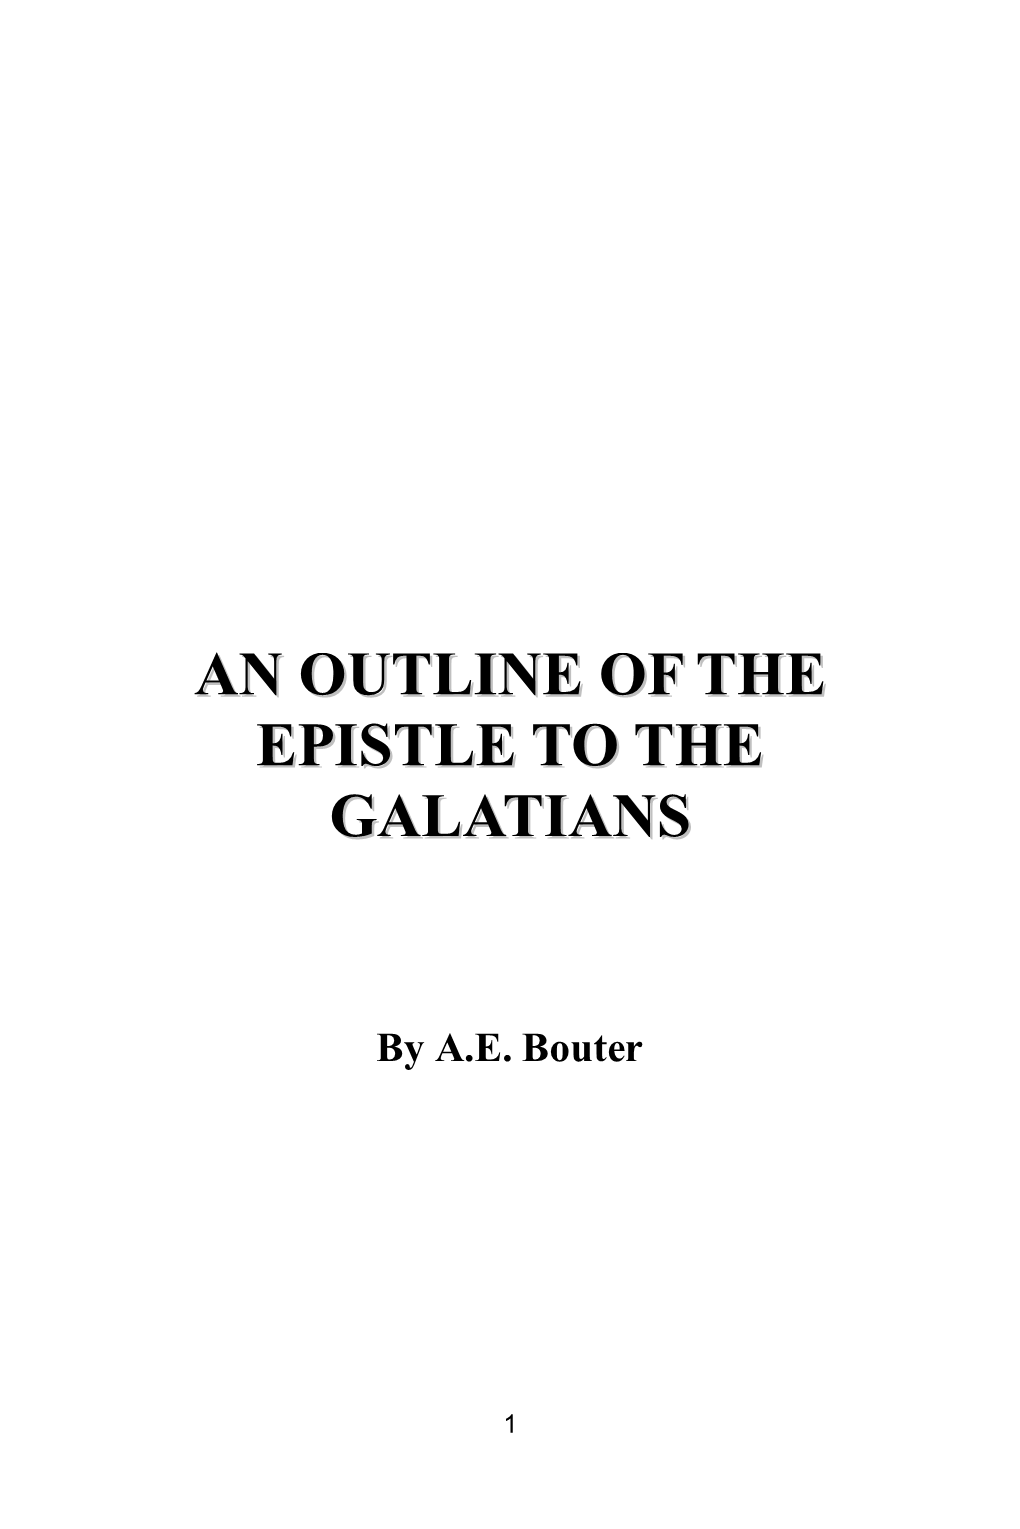 An Outline of the Epistle to the Galatians